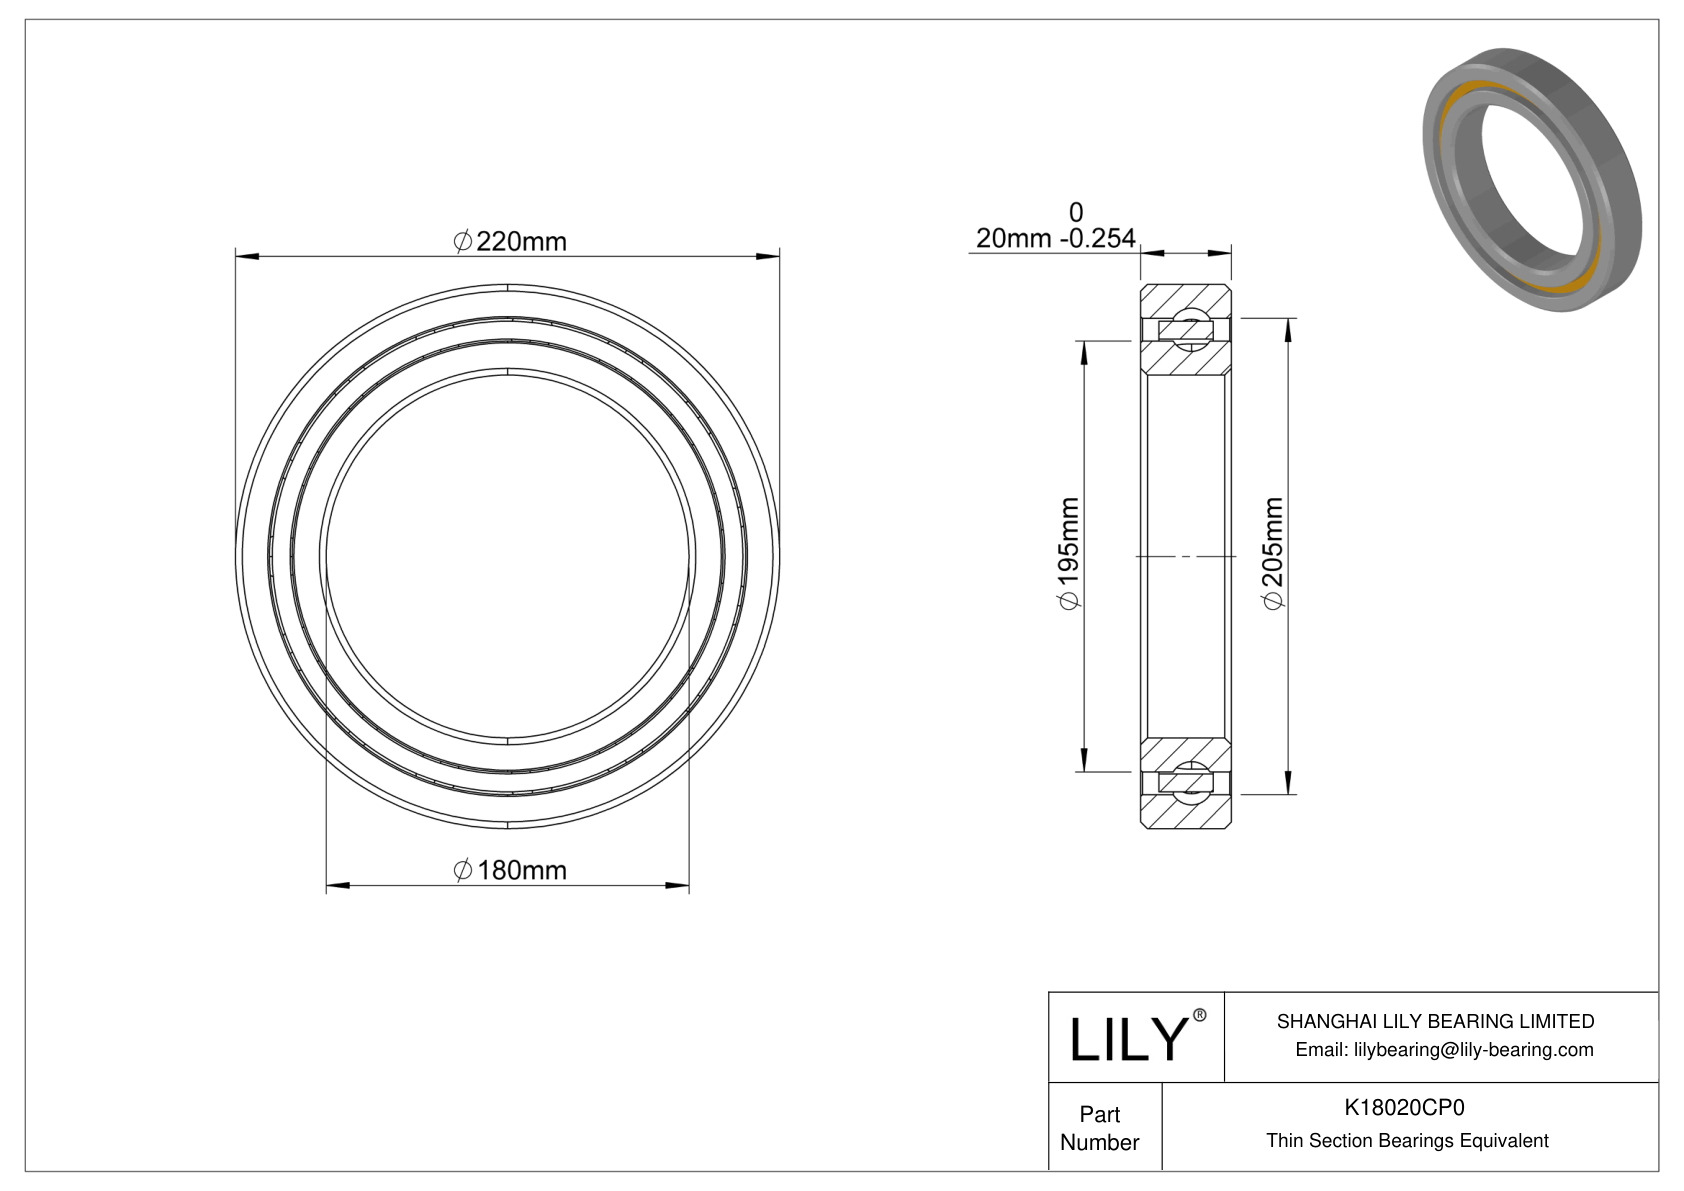 K18020CP0 Constant Section (CS) Bearings cad drawing